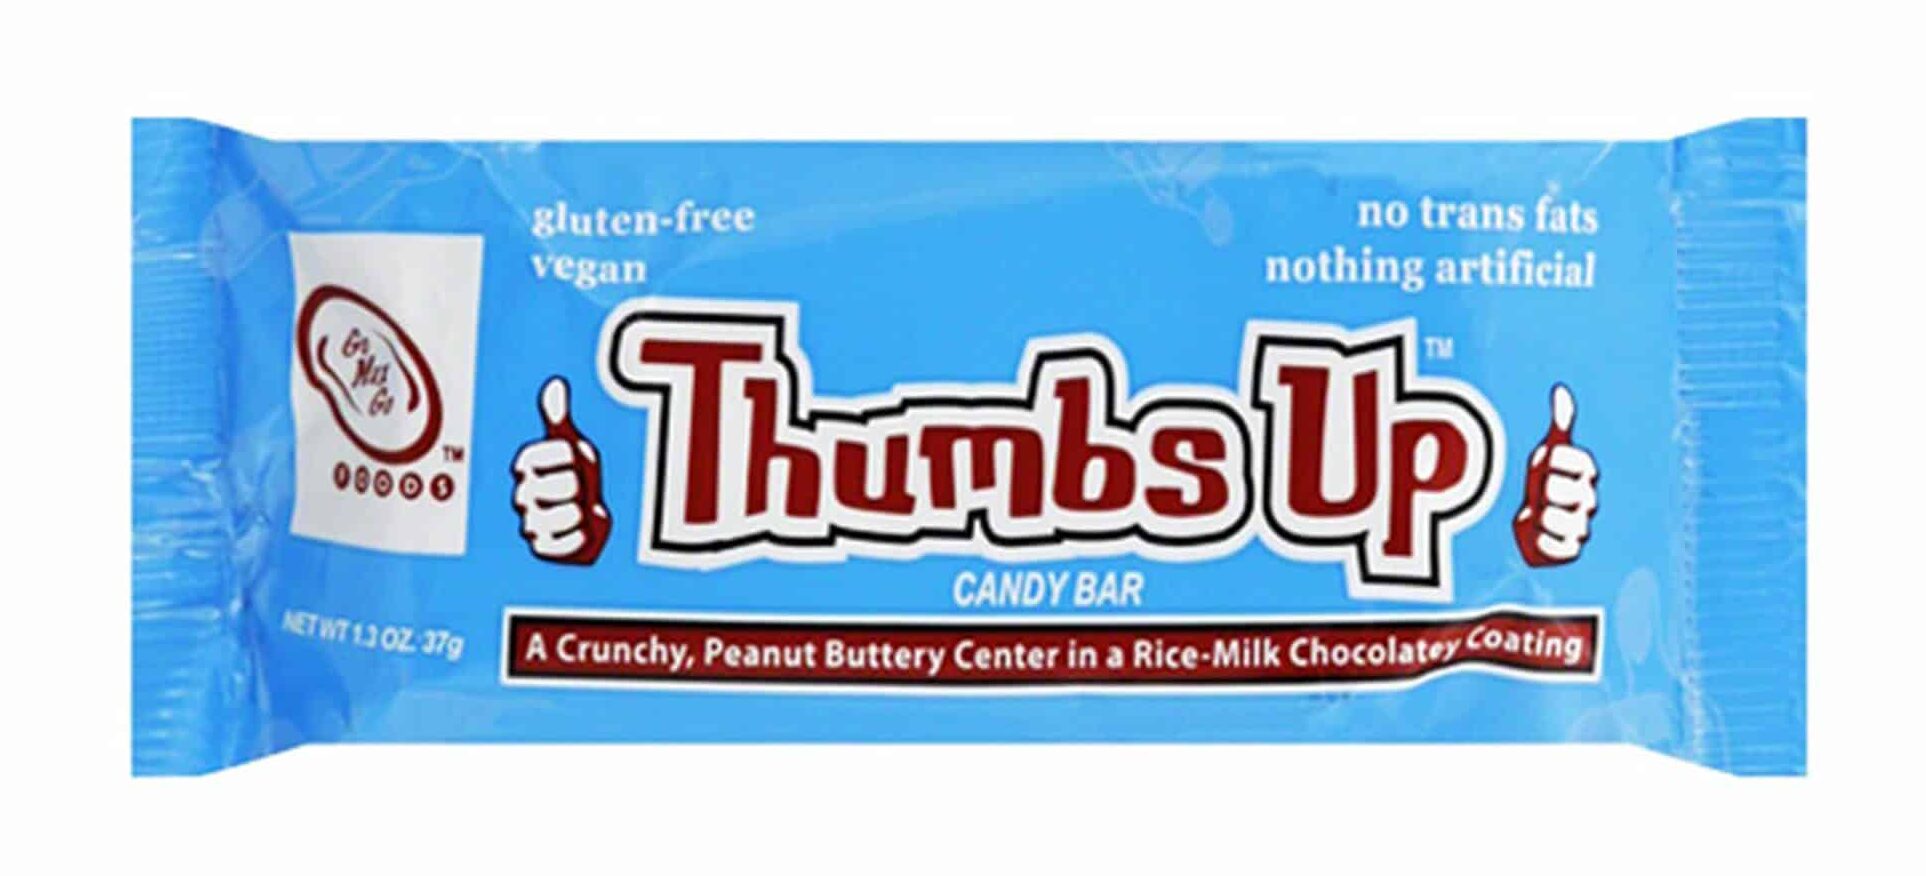 AterImber.com - Product Reviews - Go Max Go Food's Chocolate 2 Review - Thumb's Up Chocoalte Bar Wrapper - vegan, vegan food, food reviews, chocolate, vegan chocolate, food blogger, food reviewer